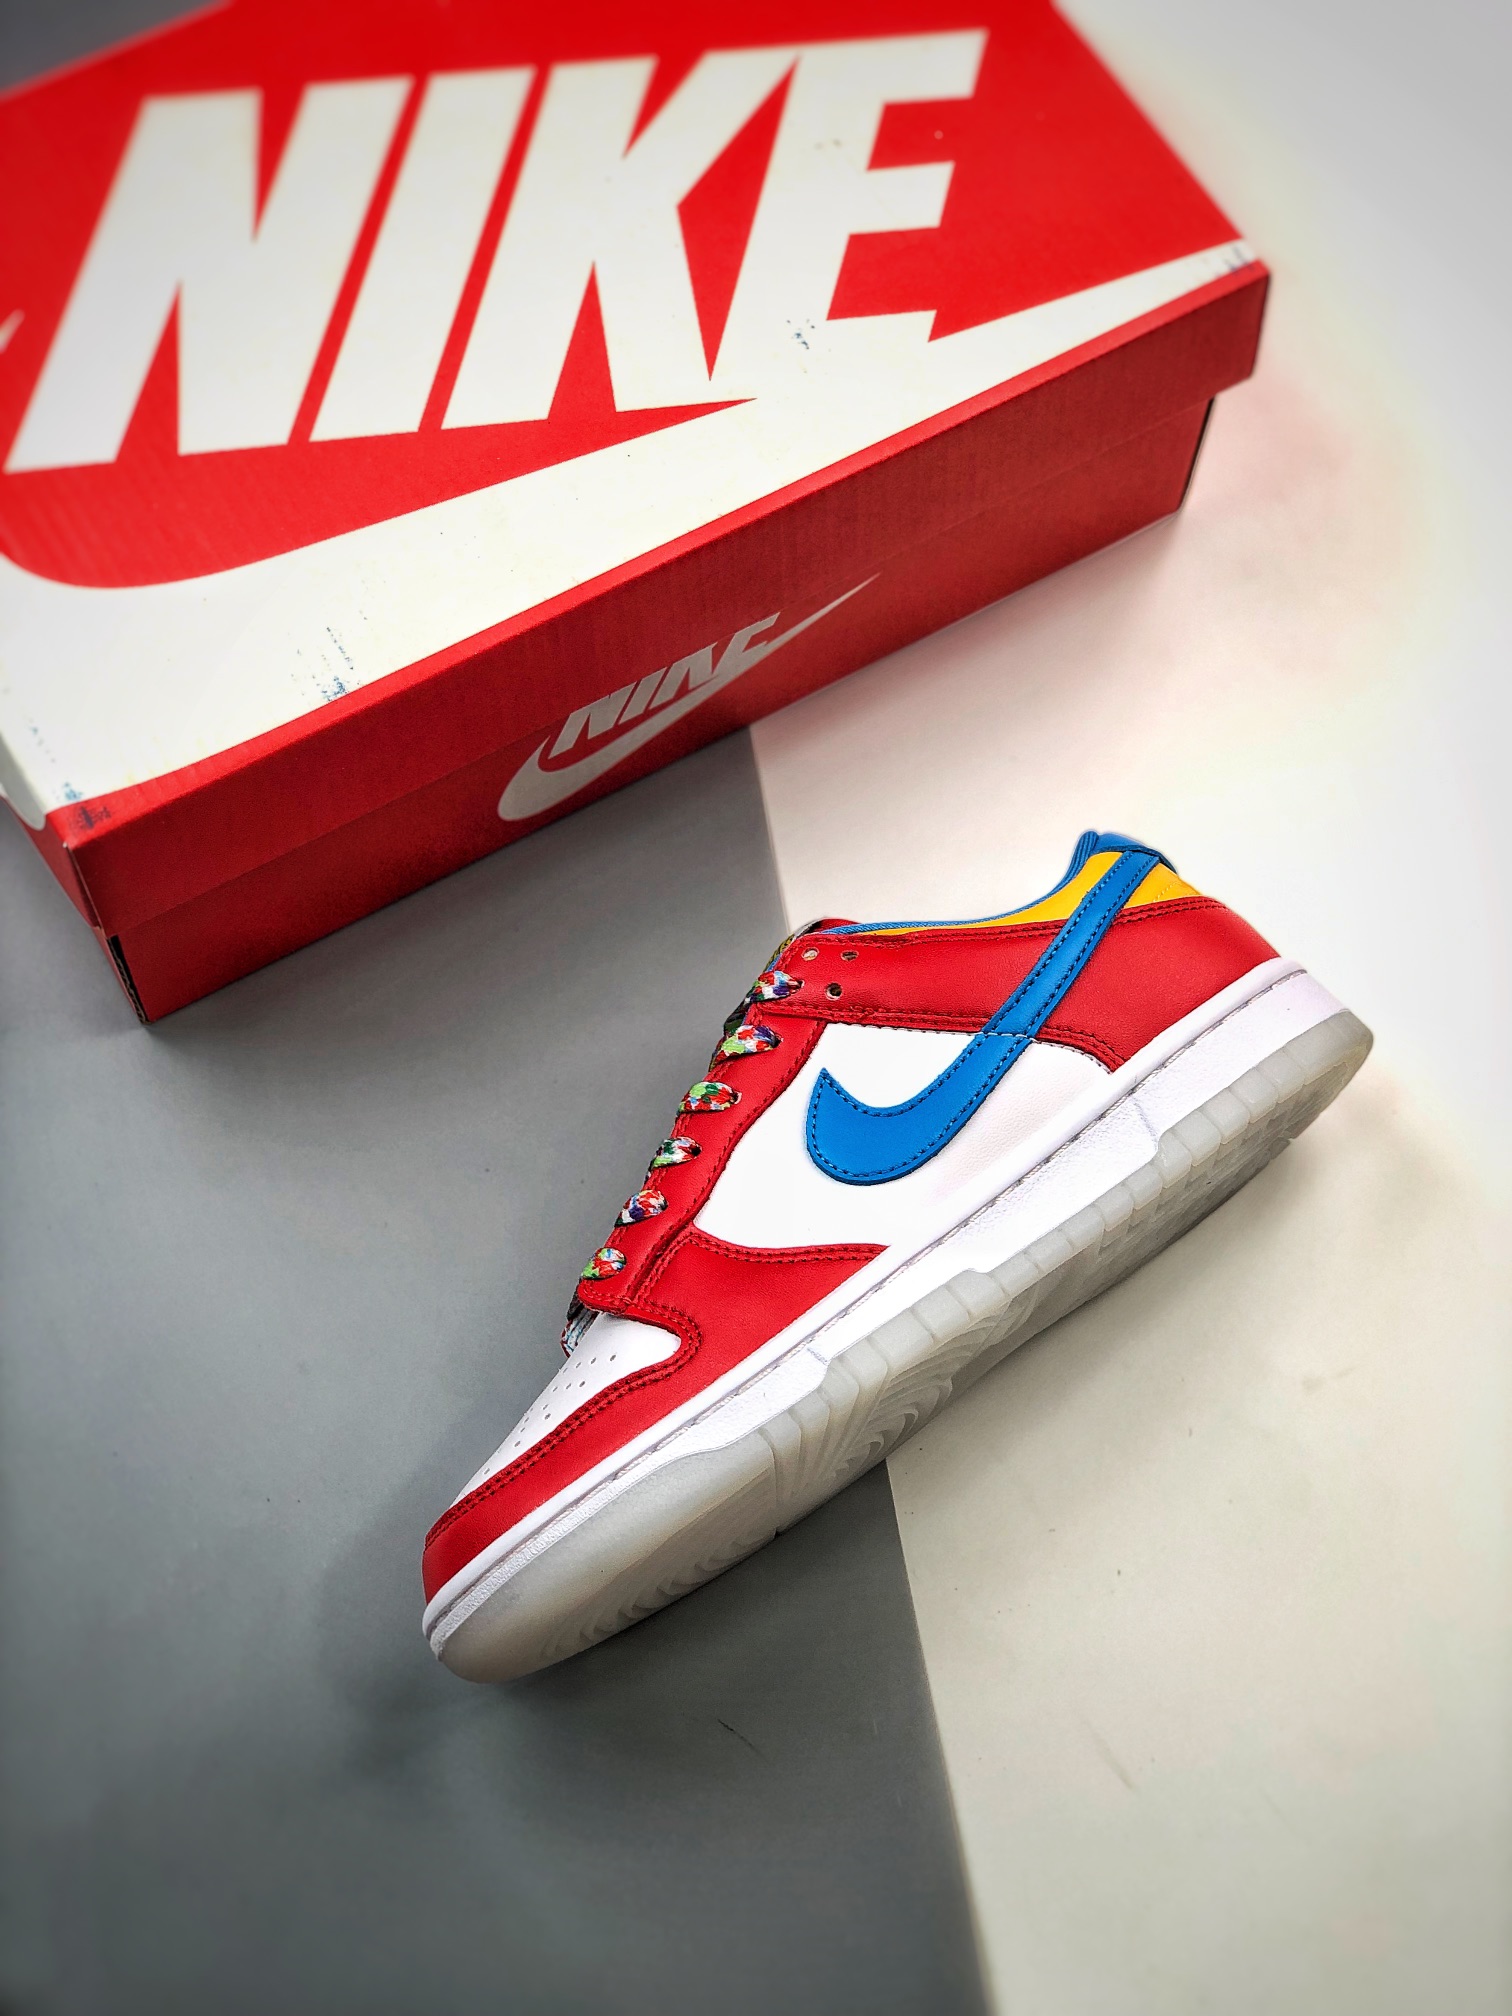 LeBron James X Nike Dunk Low Fruity Pebbles White/Red-Blue DH8009-600 For  Sale – Sneaker Hello